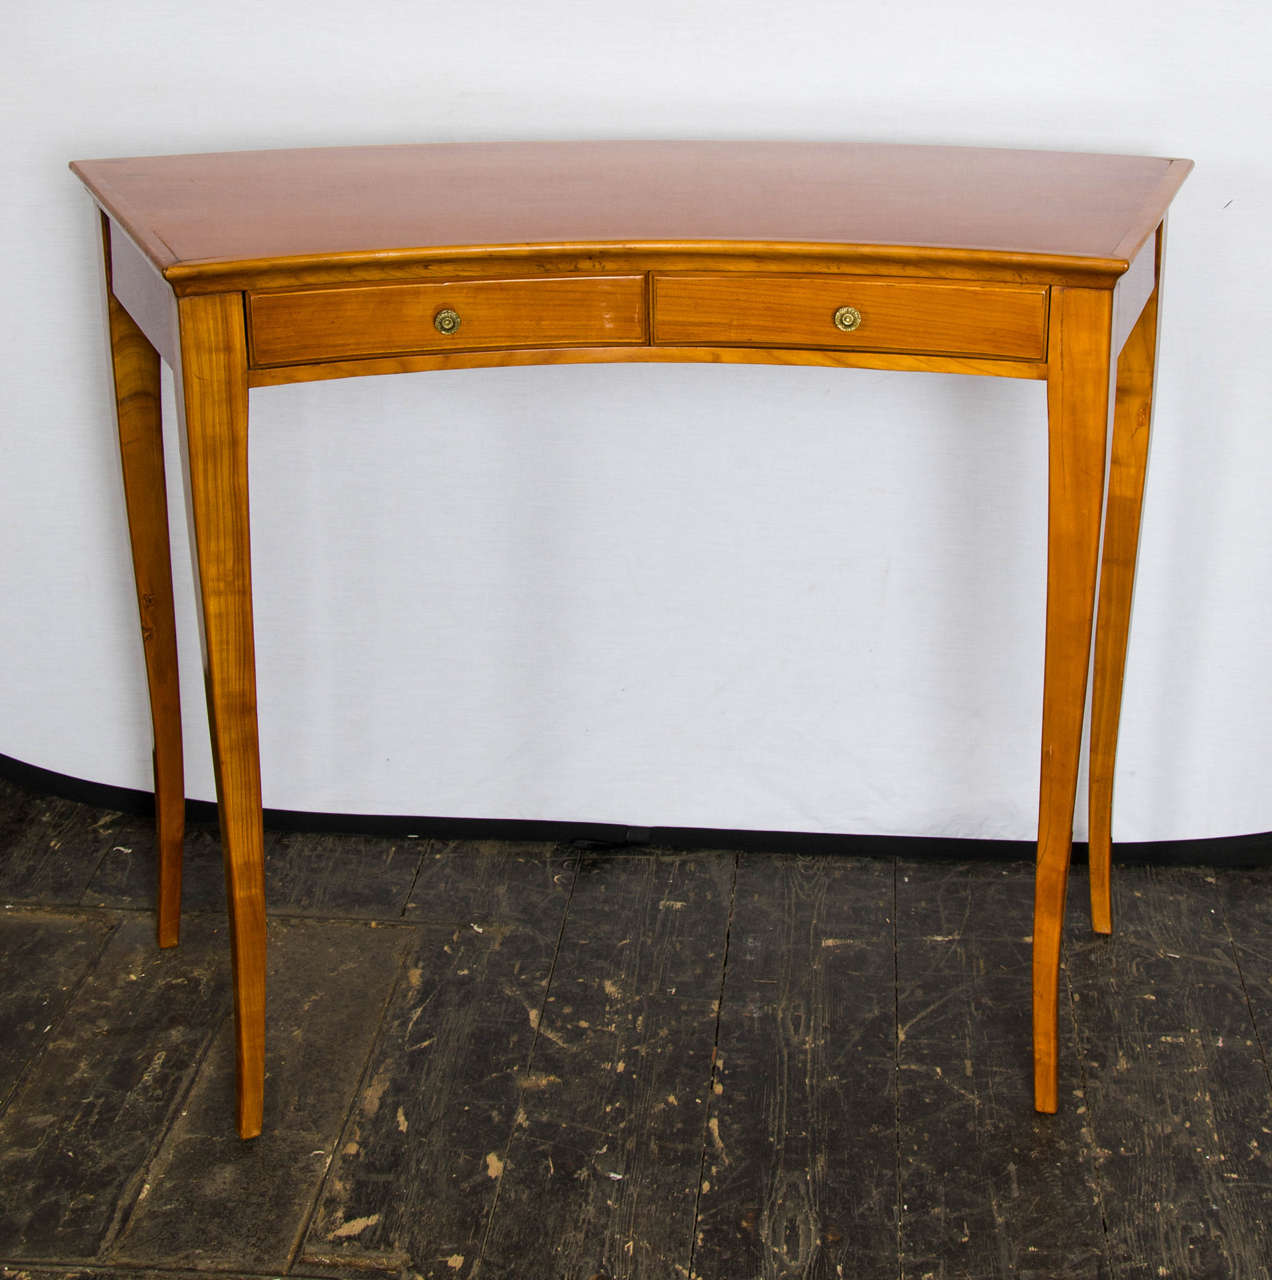 1940s Italian curved little writing table in walnut with two drawers and nice ornamental brass handles.